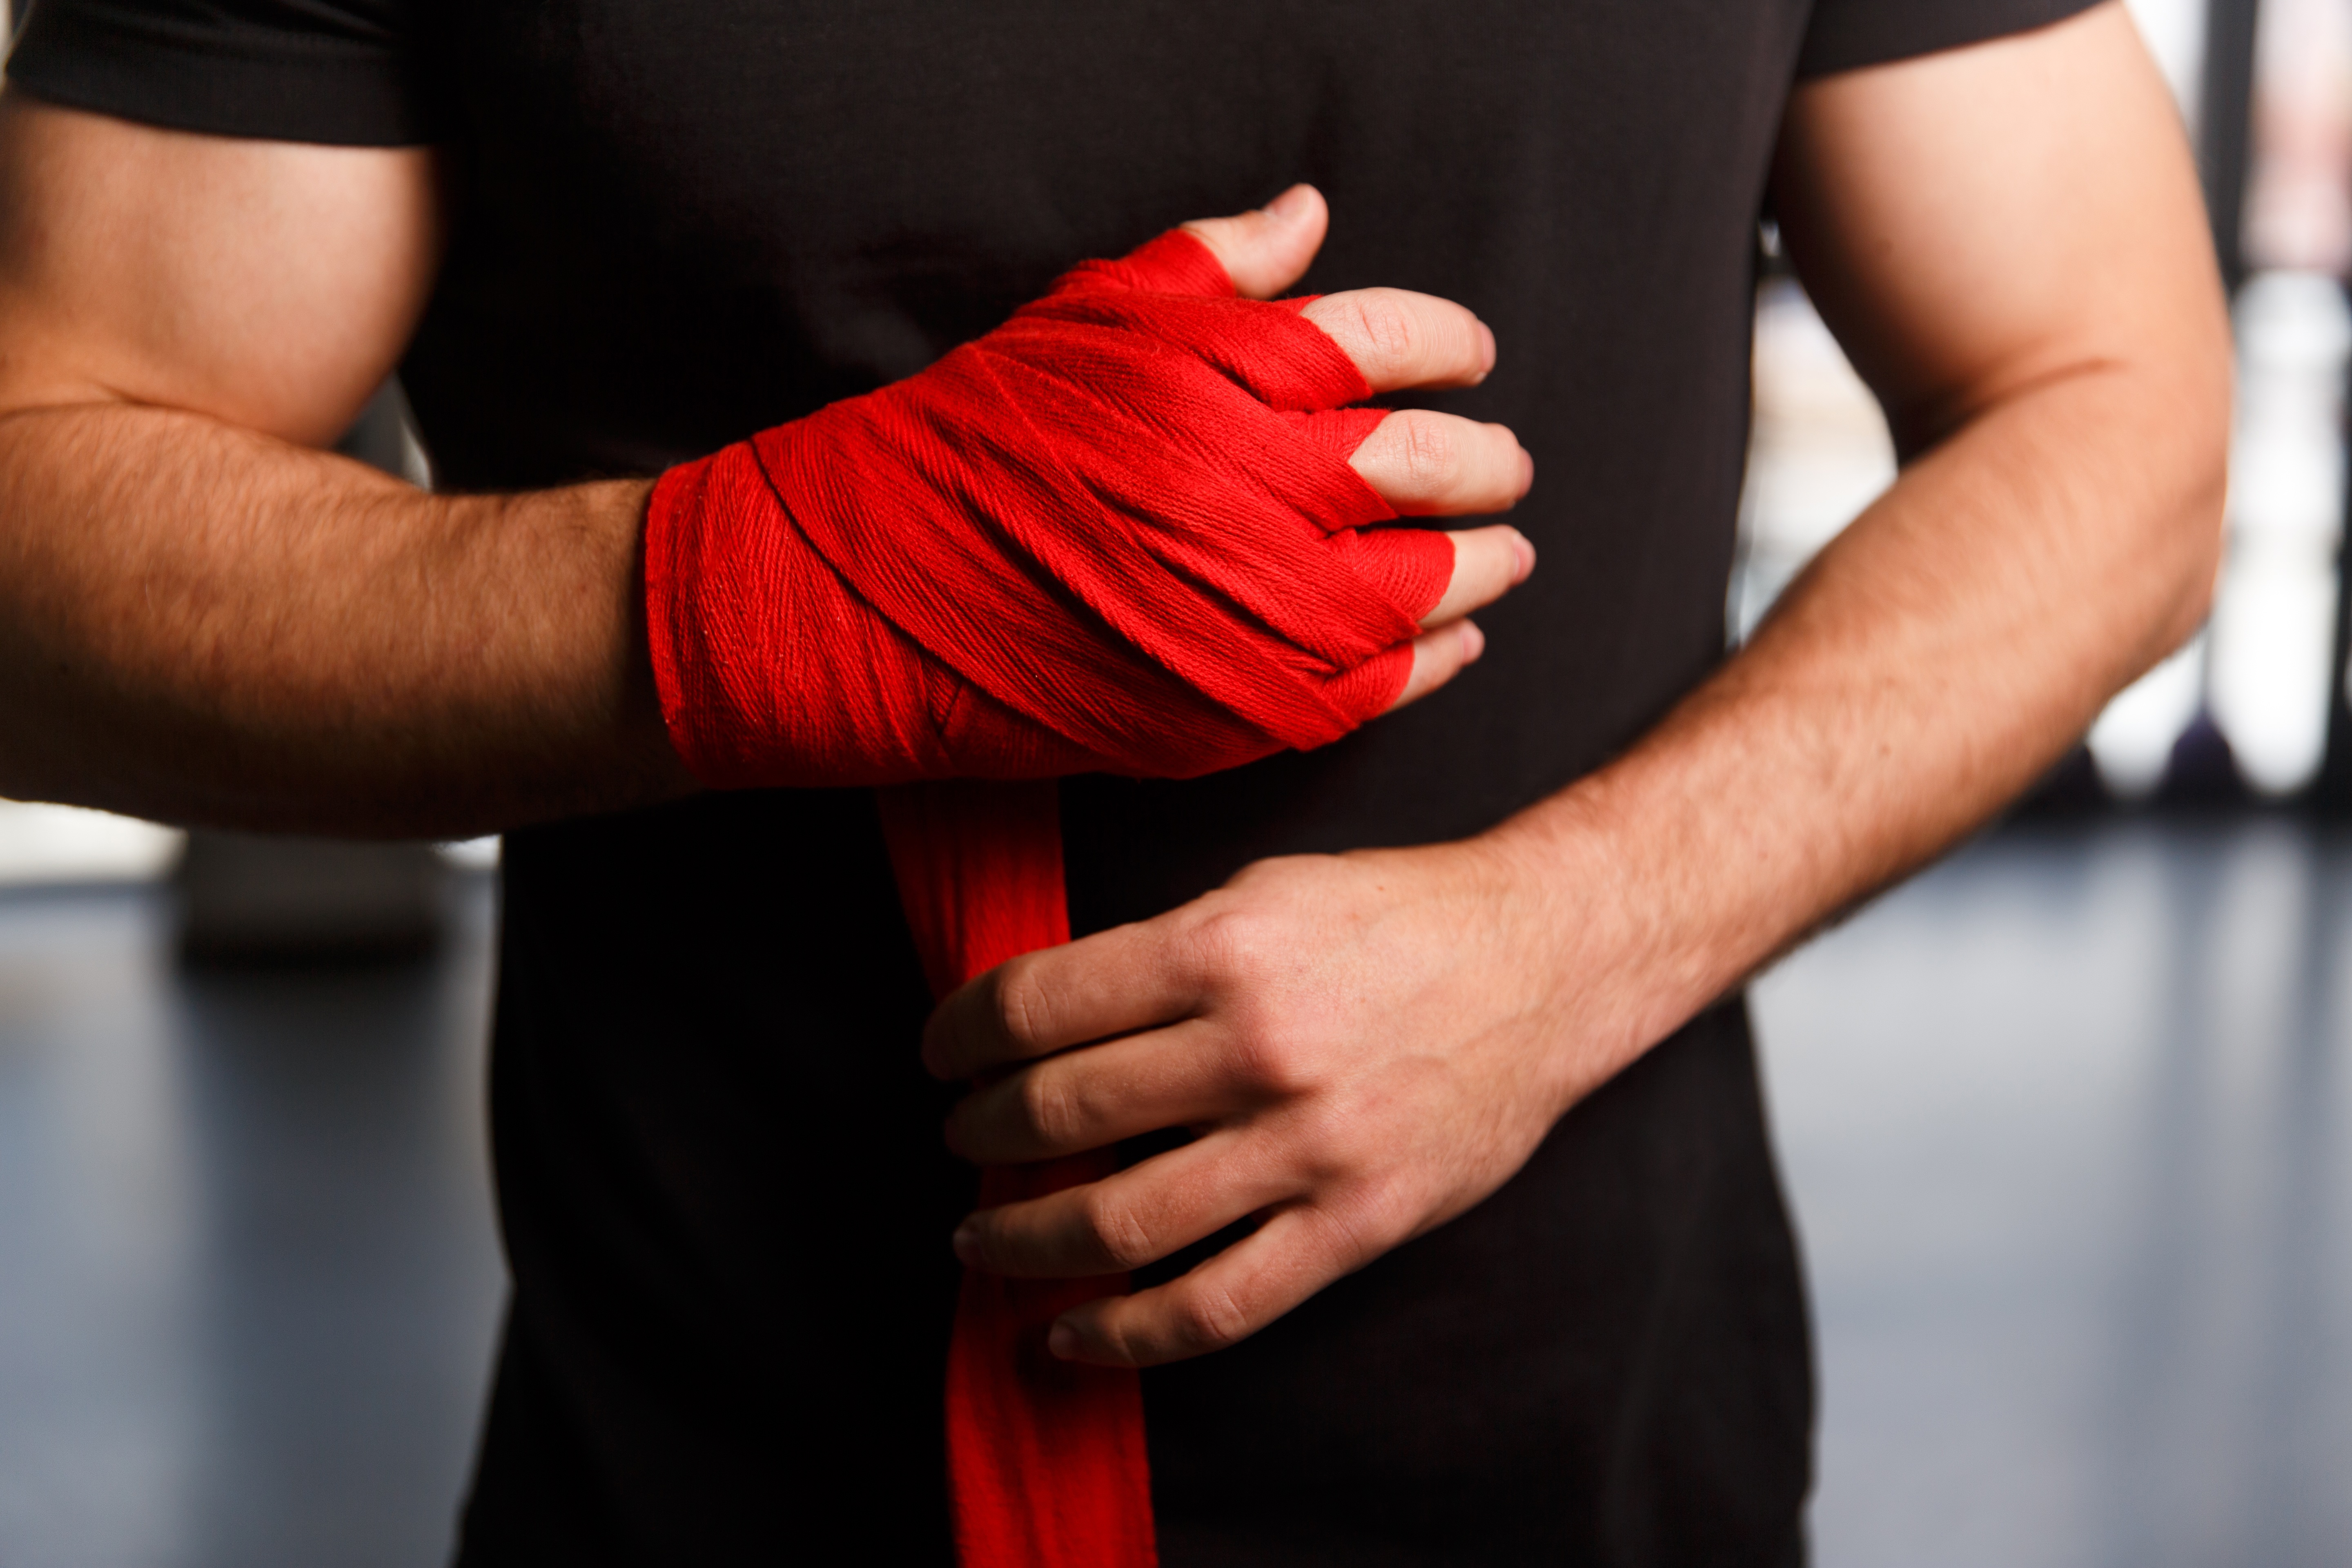 BENEFITS OF WEARING COMPRESSION TOPS WHEN BOXING